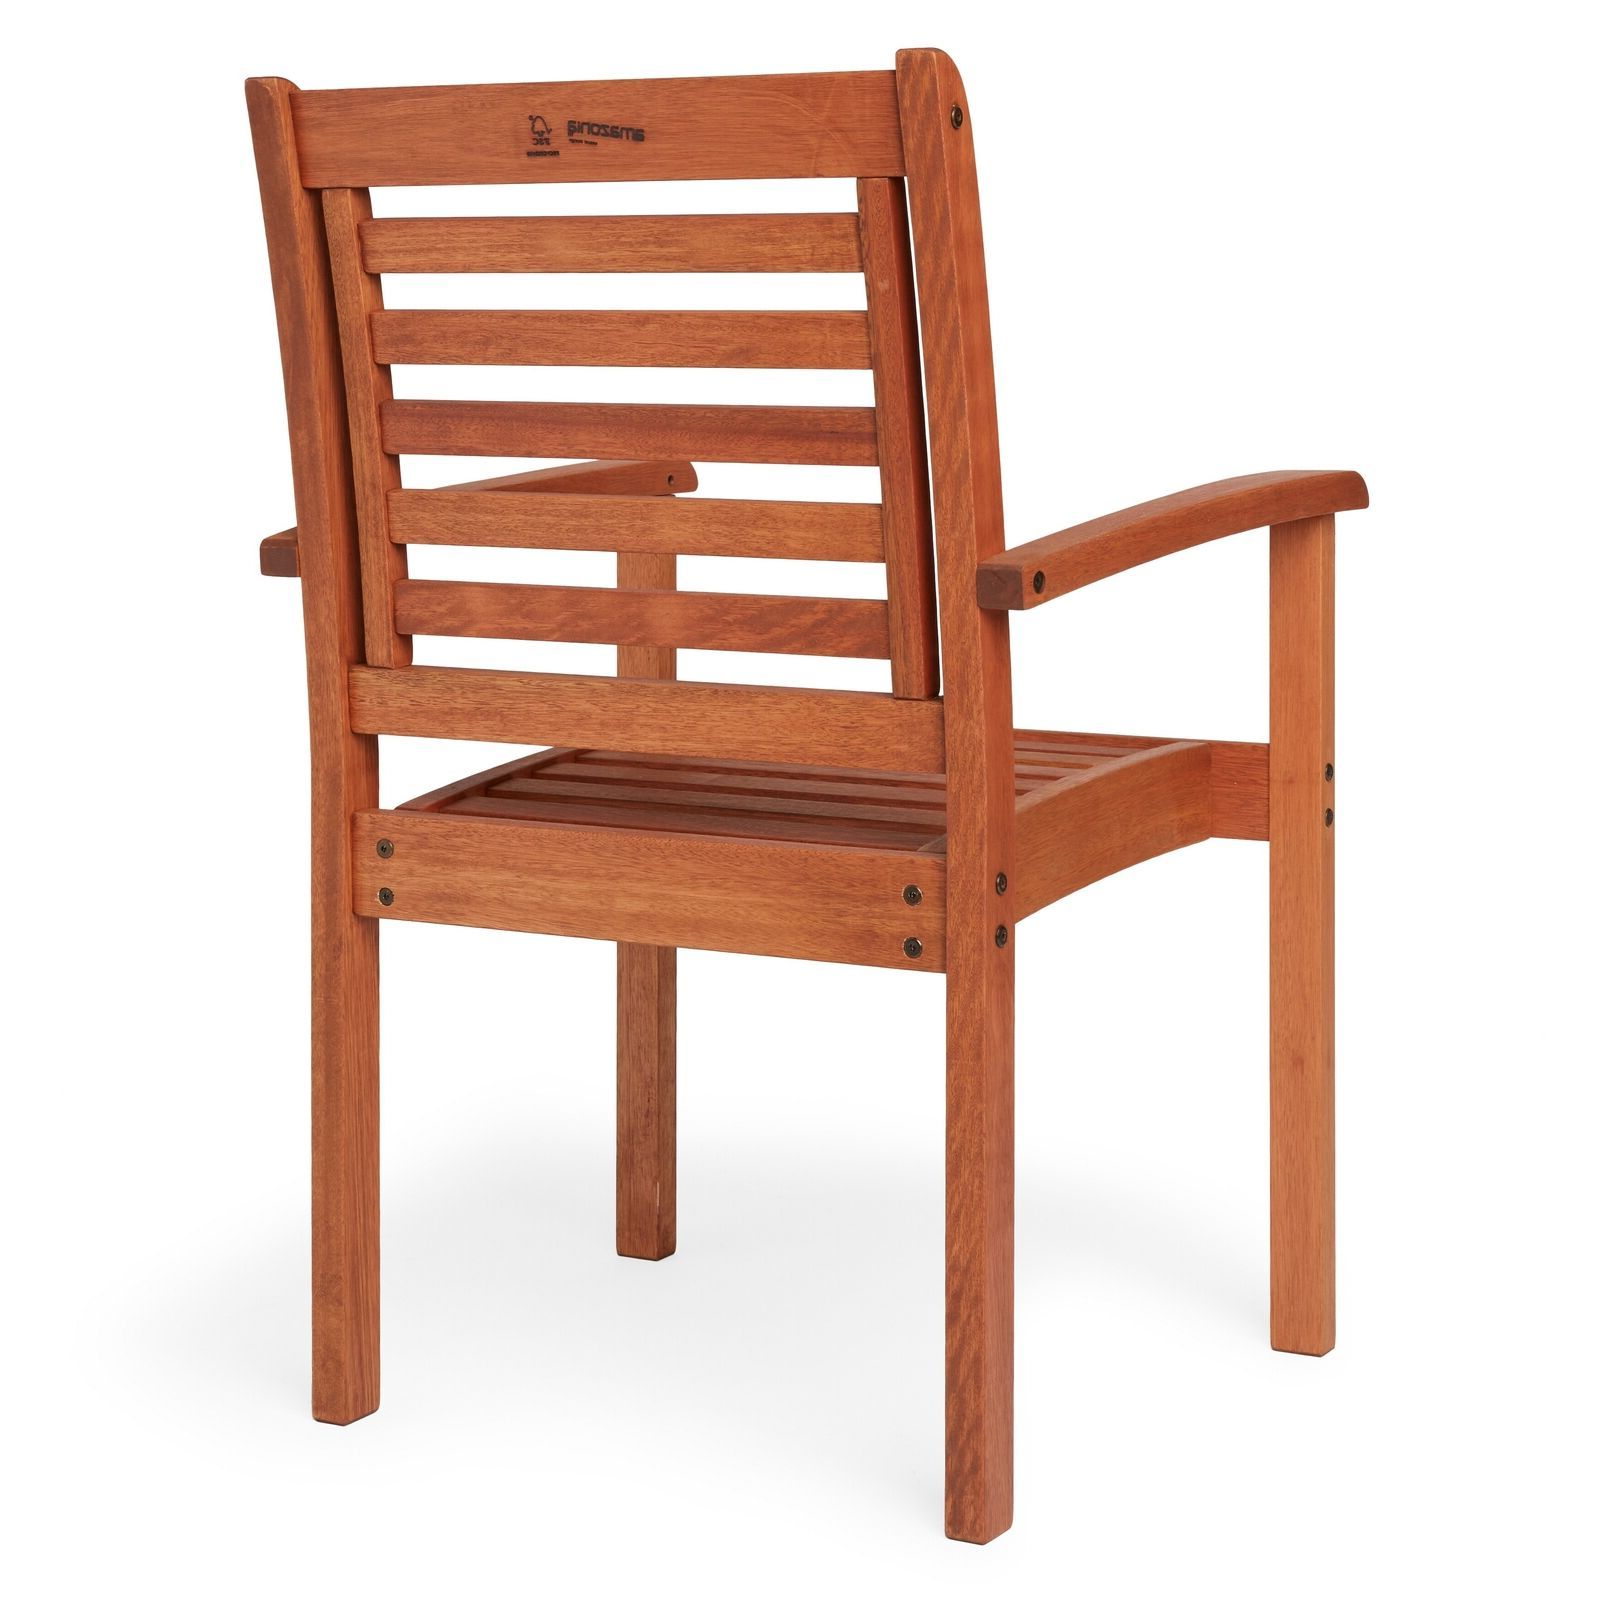 Newest Havenside Home Tottenville Eucalyptus Wood Stackable Chair – Brown N/a Intended For Havenside Home Tottenville Eucalyptus Loungers (View 18 of 25)